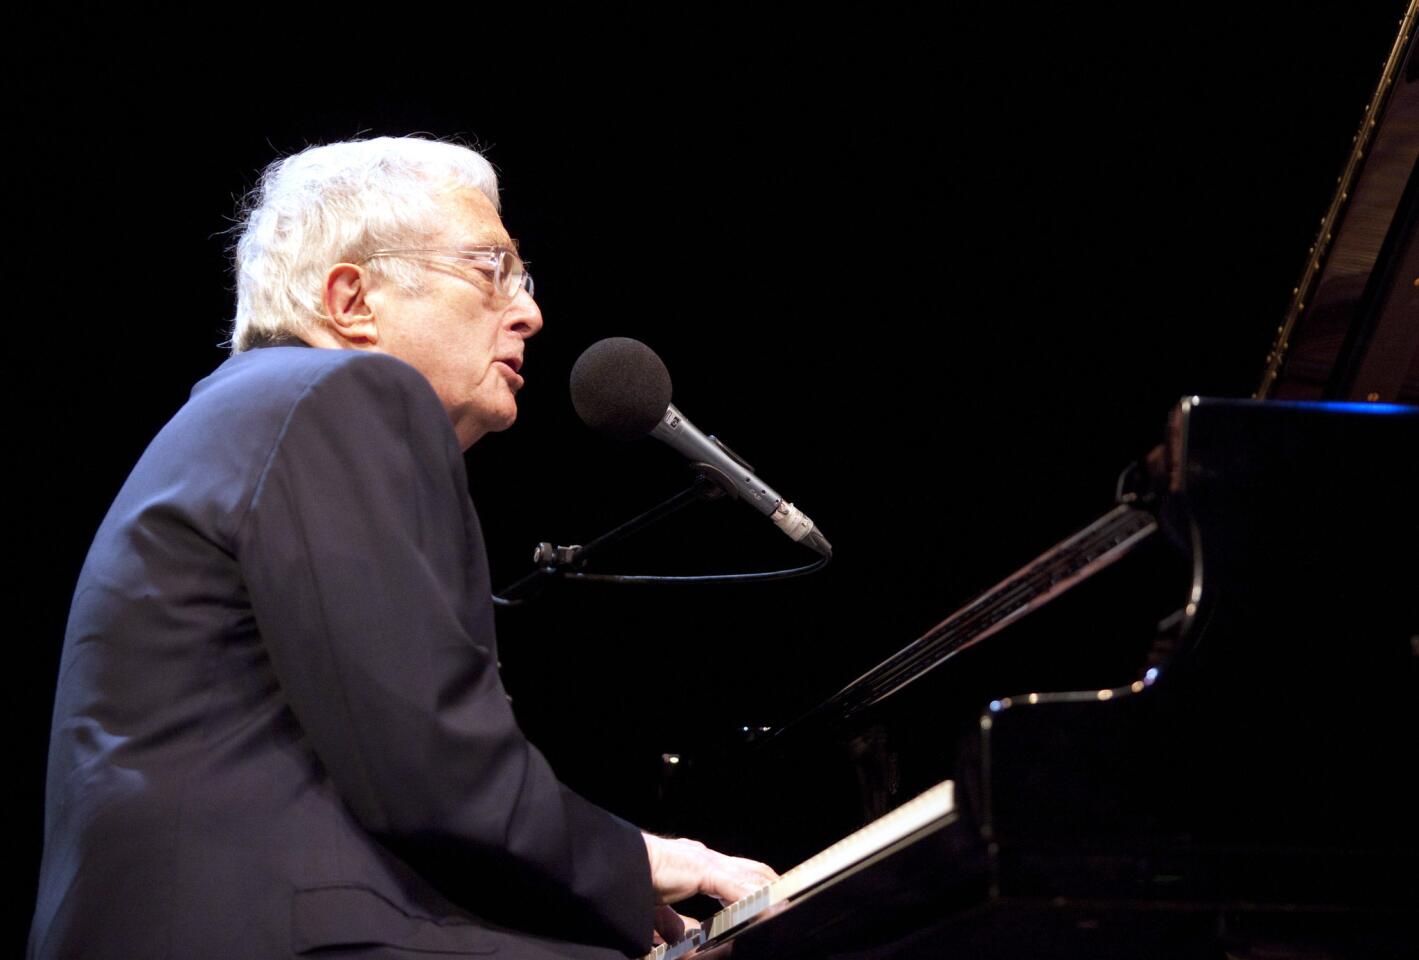 The composer responsible for all those latter-day Disney tunes that get stuck in your head all day, Randy Newman turns 68 today.